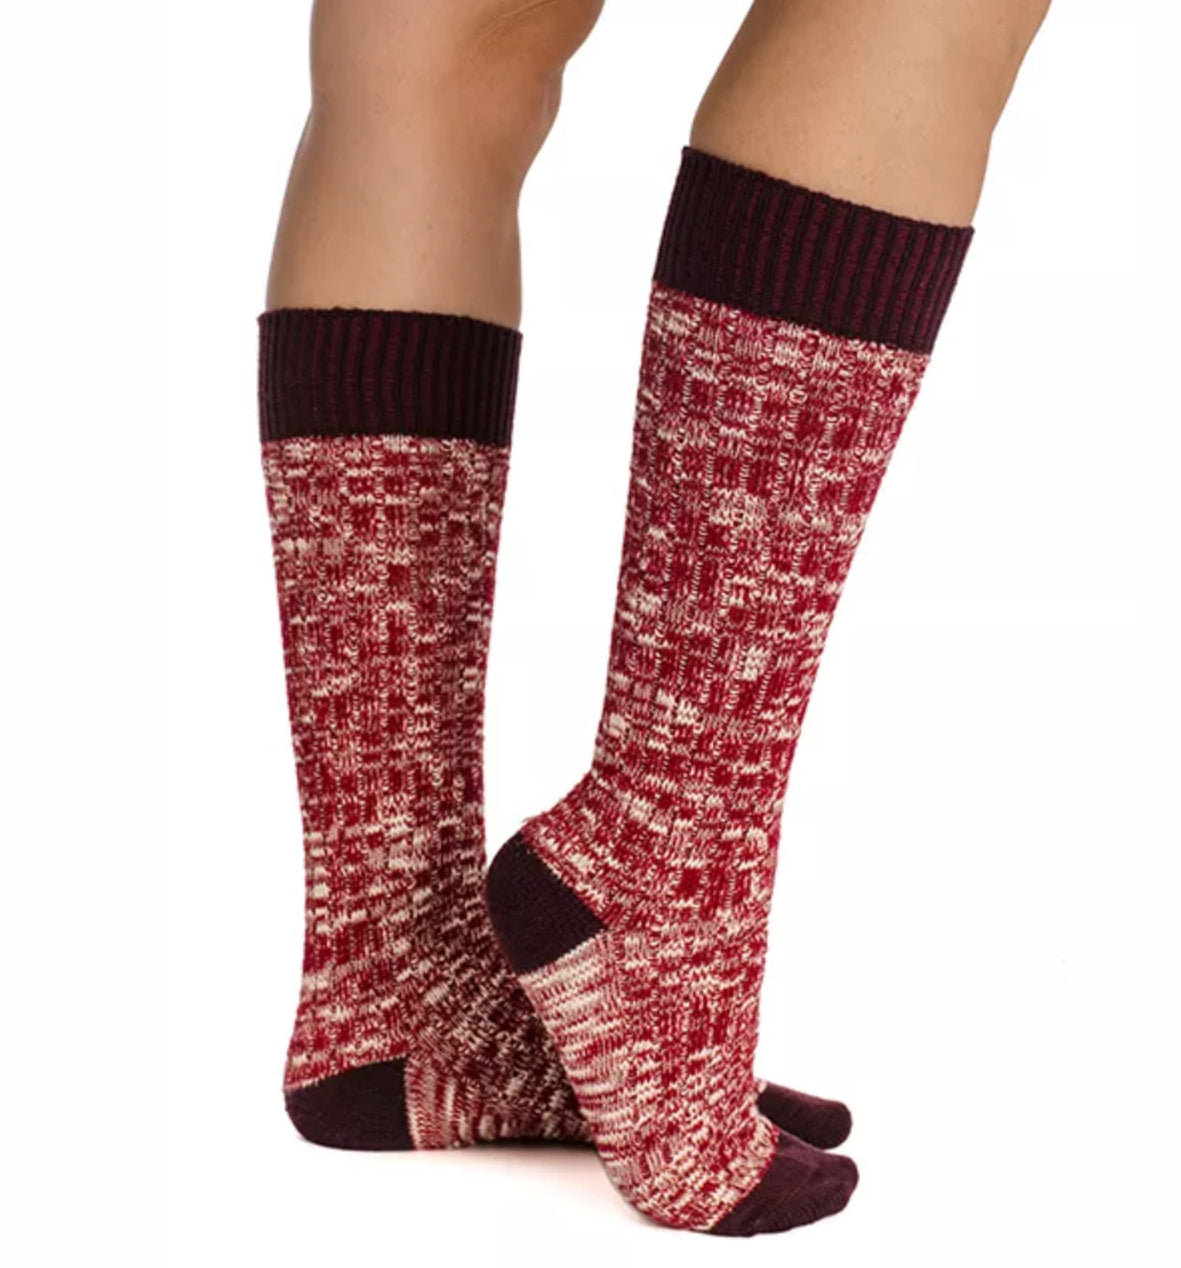 Buy Red Tartan Jersey Stirrup Leggings from Next Luxembourg